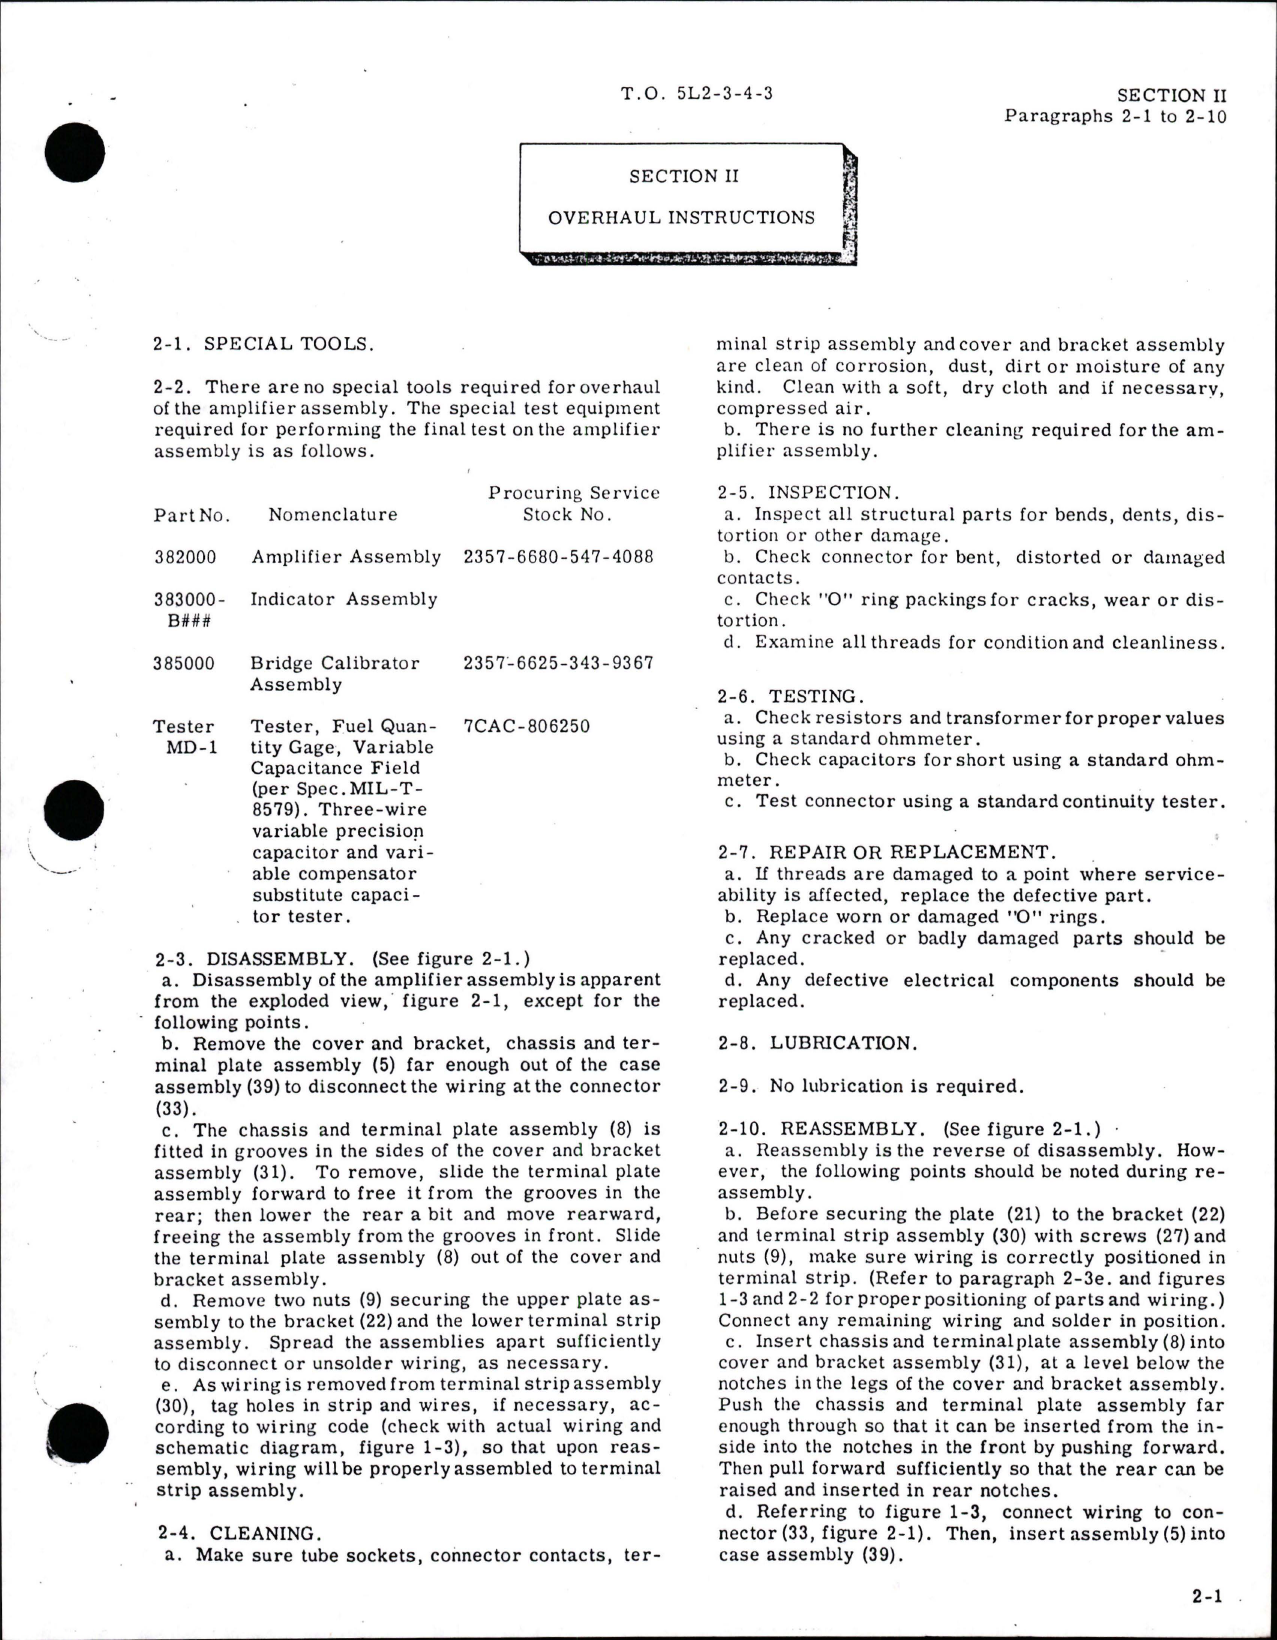 Sample page 9 from AirCorps Library document: Instrument Flying Handbook 